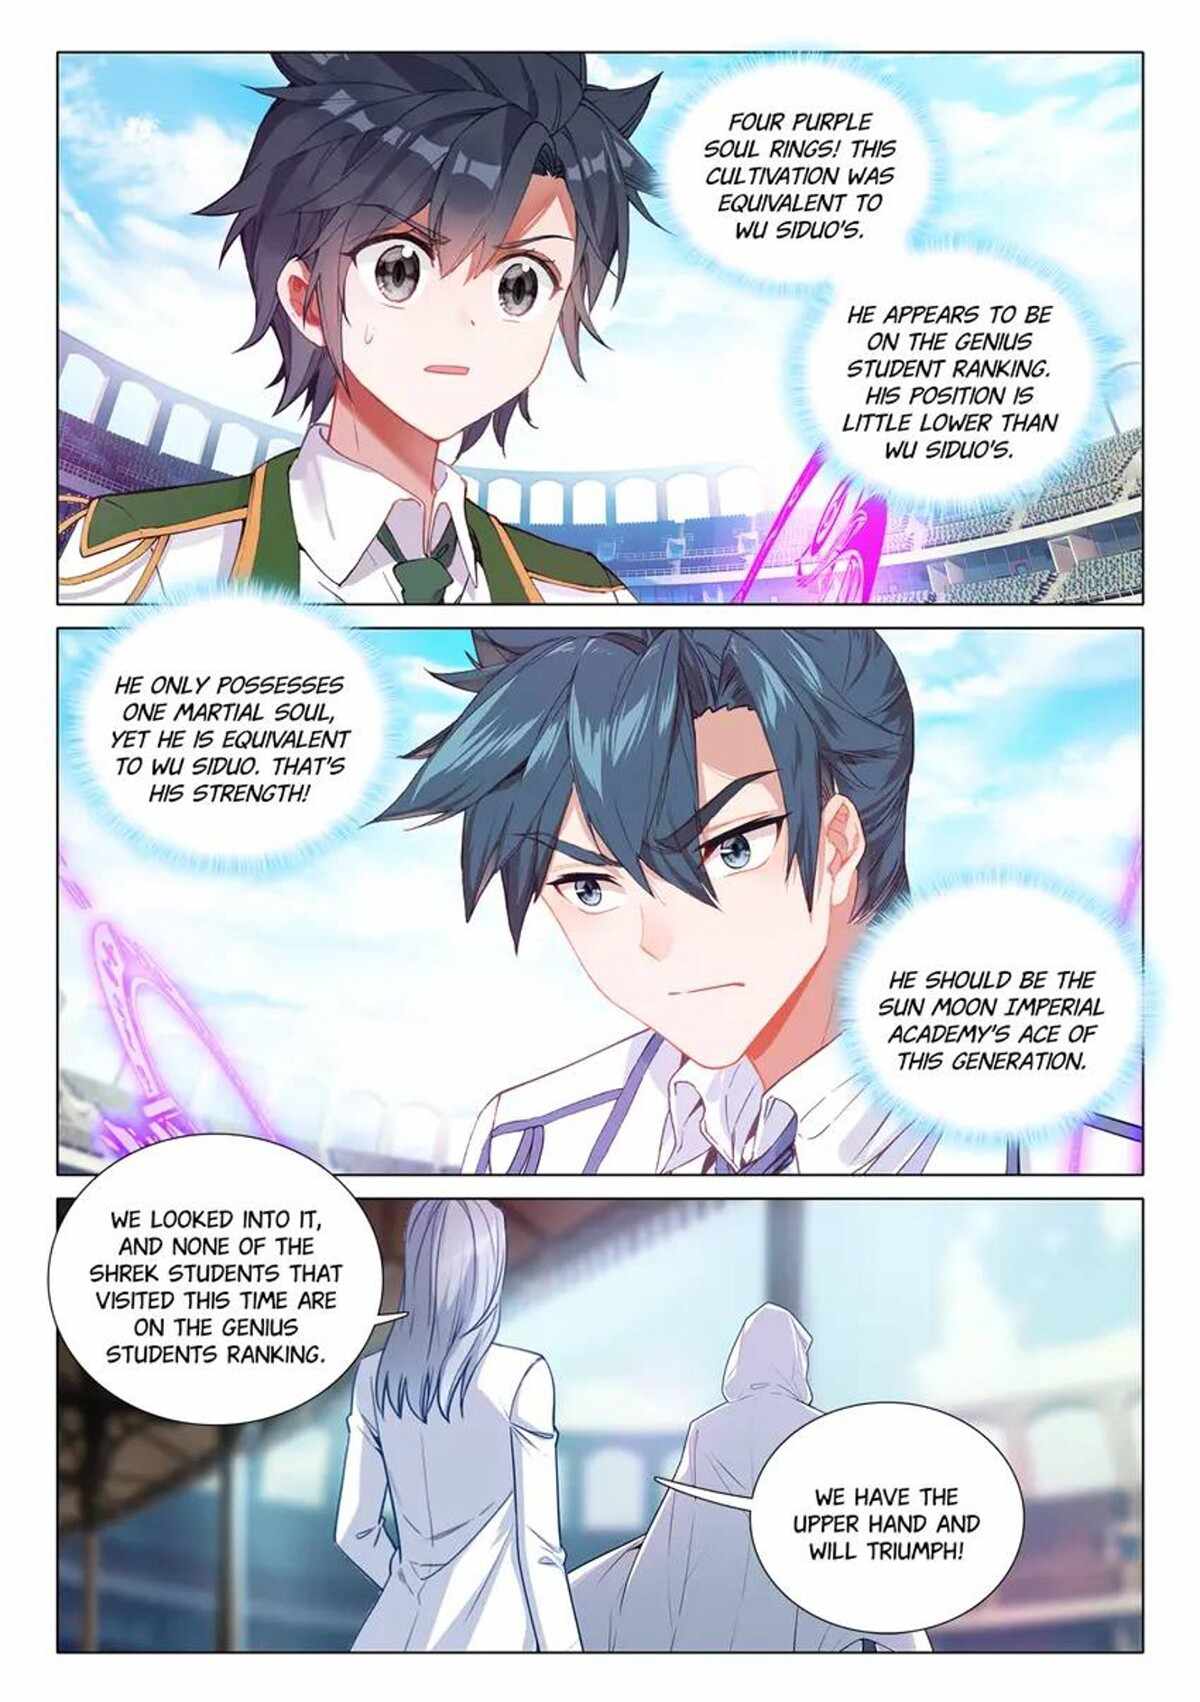 Soul Land III - The Legend of the Dragon King Chapter 431-eng-li - Page 5